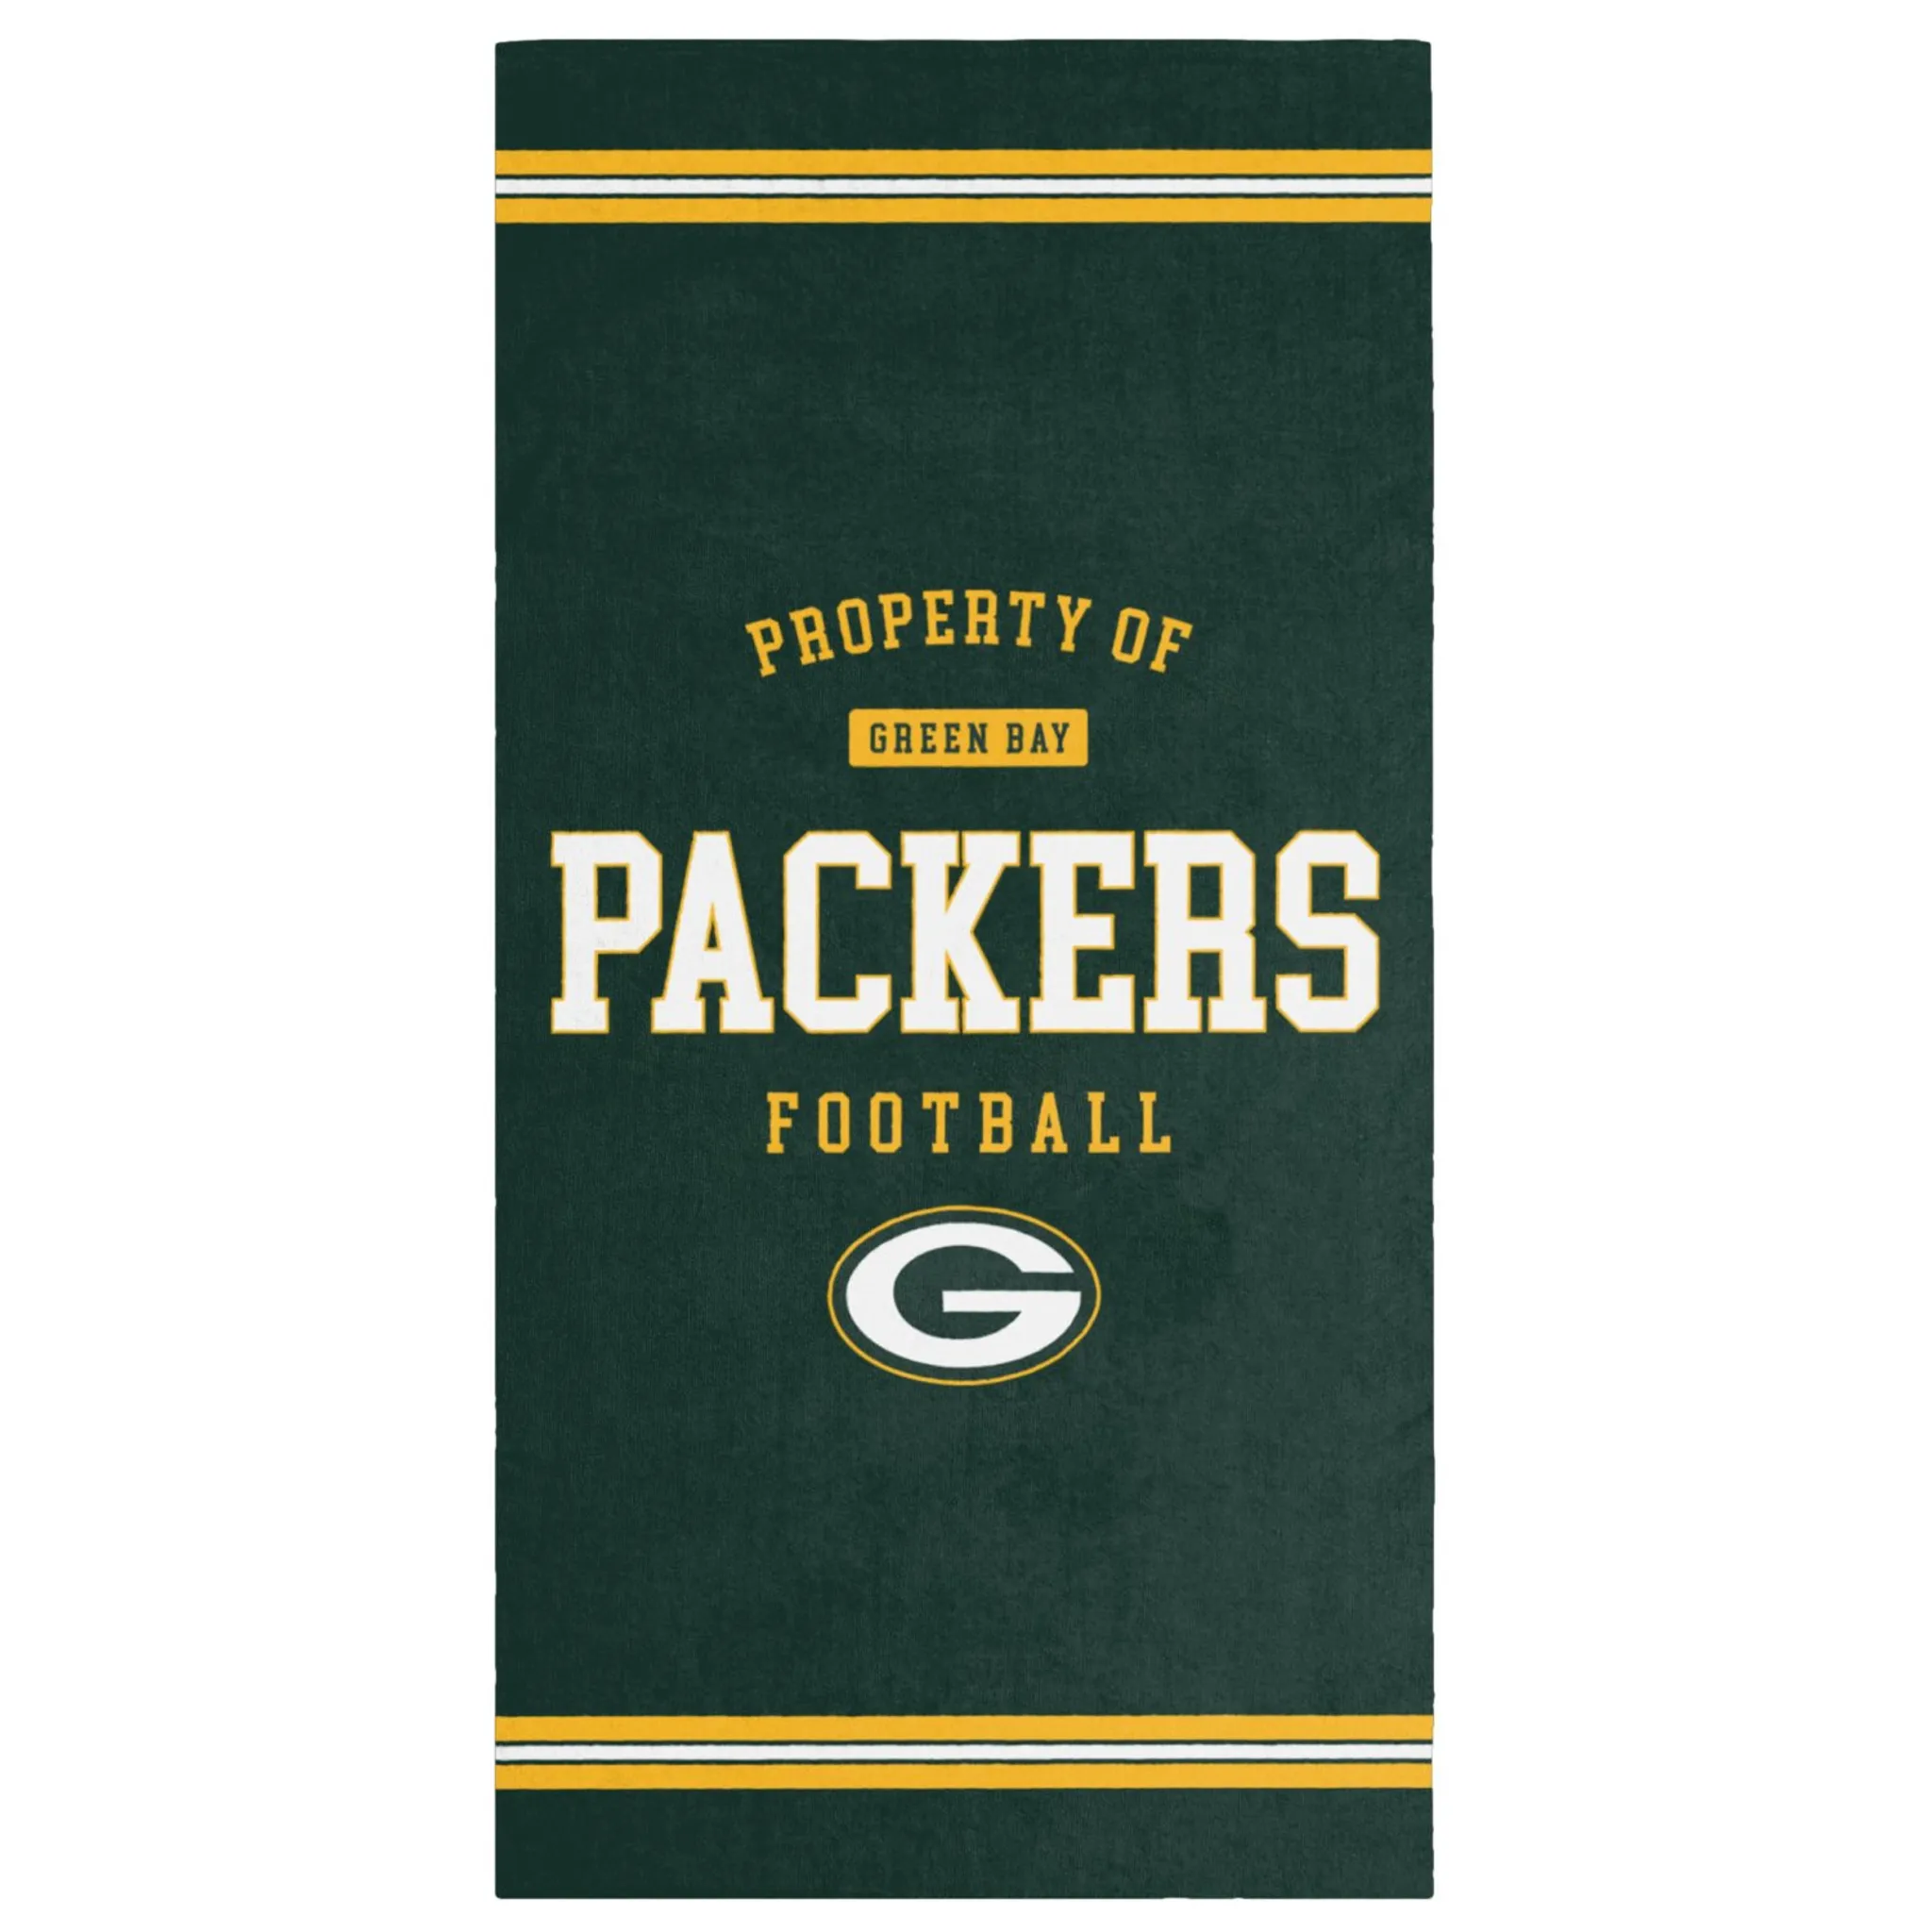 NFL Strandtuch PROPERTY OF Green Bay Packers